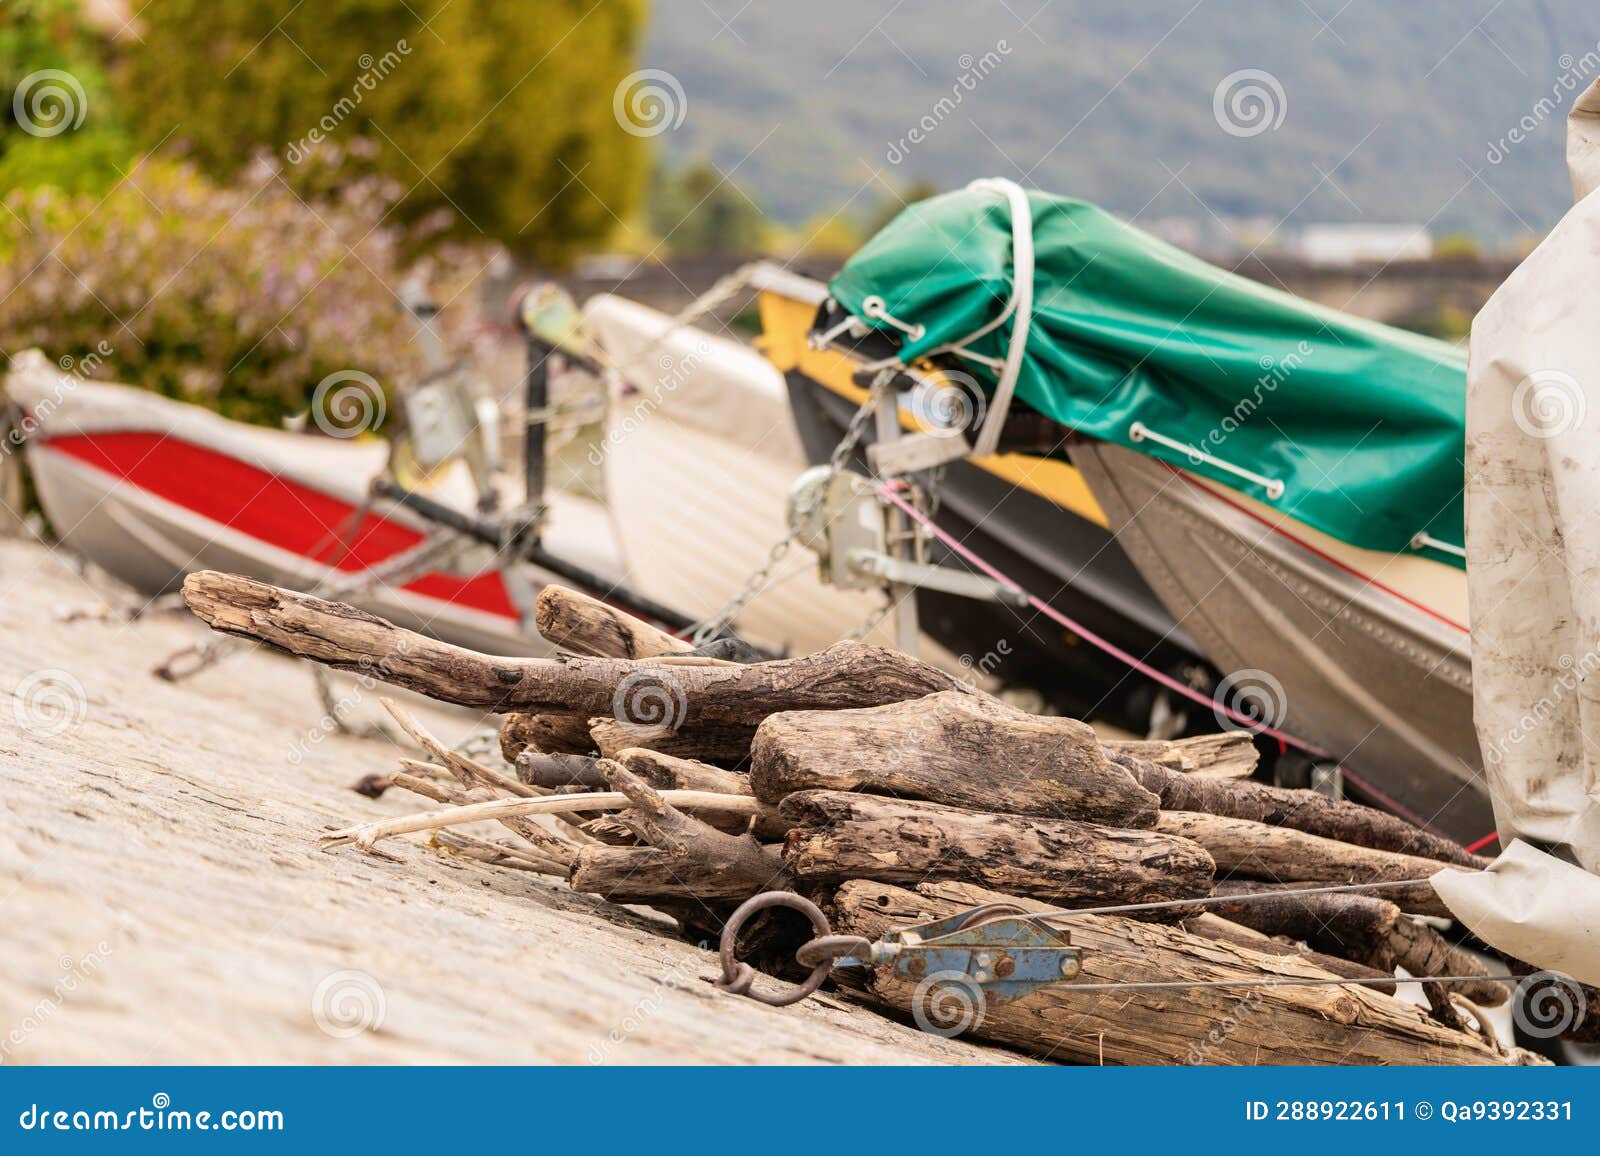 Small Fishing Boats with Fishing Net and Equipment, Motor Boat or